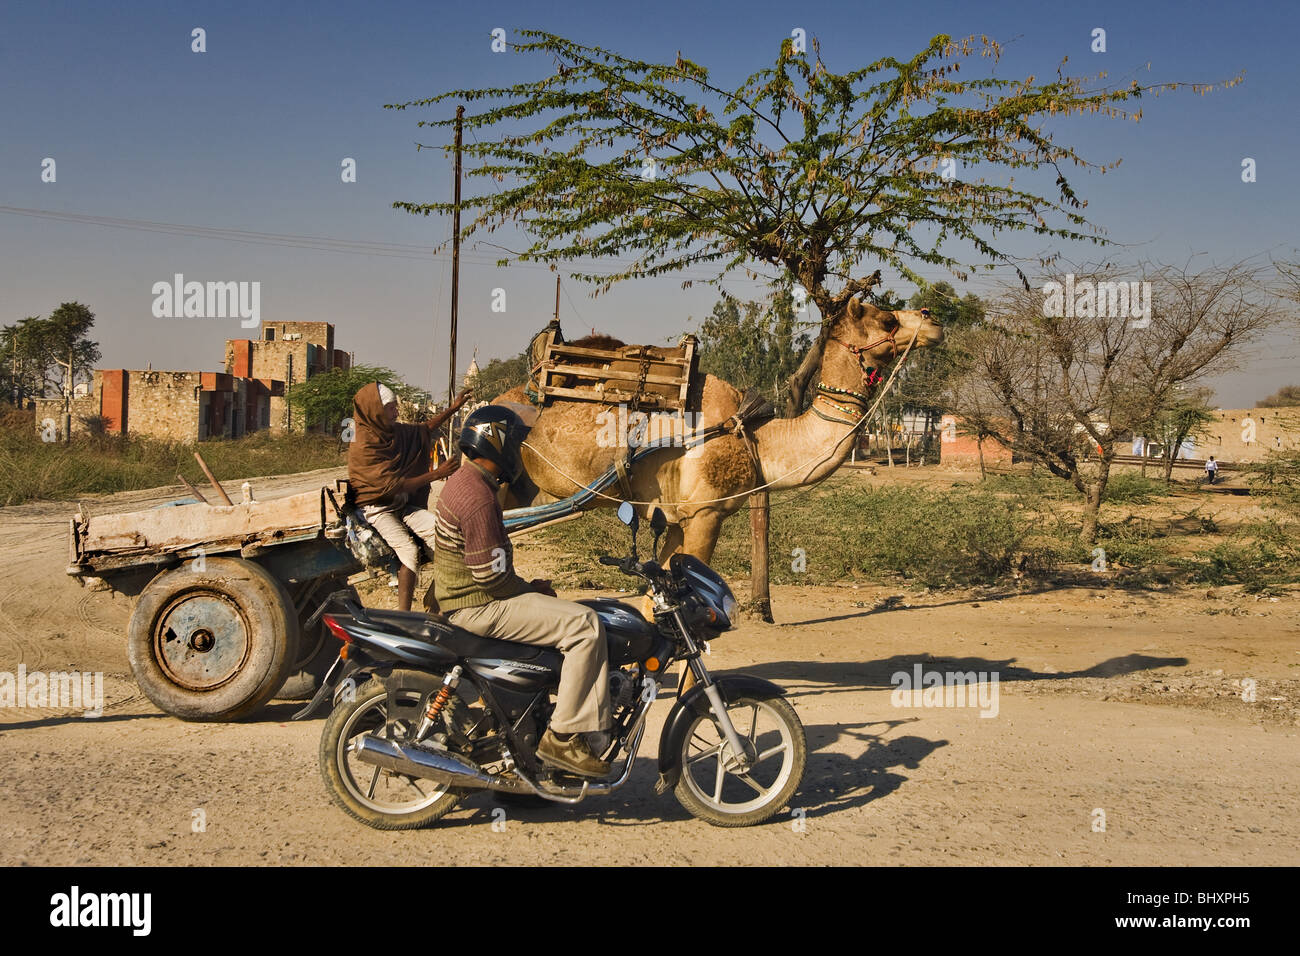 camel and a motorbike on a street, North India, India, Asia Stock Photo -  Alamy